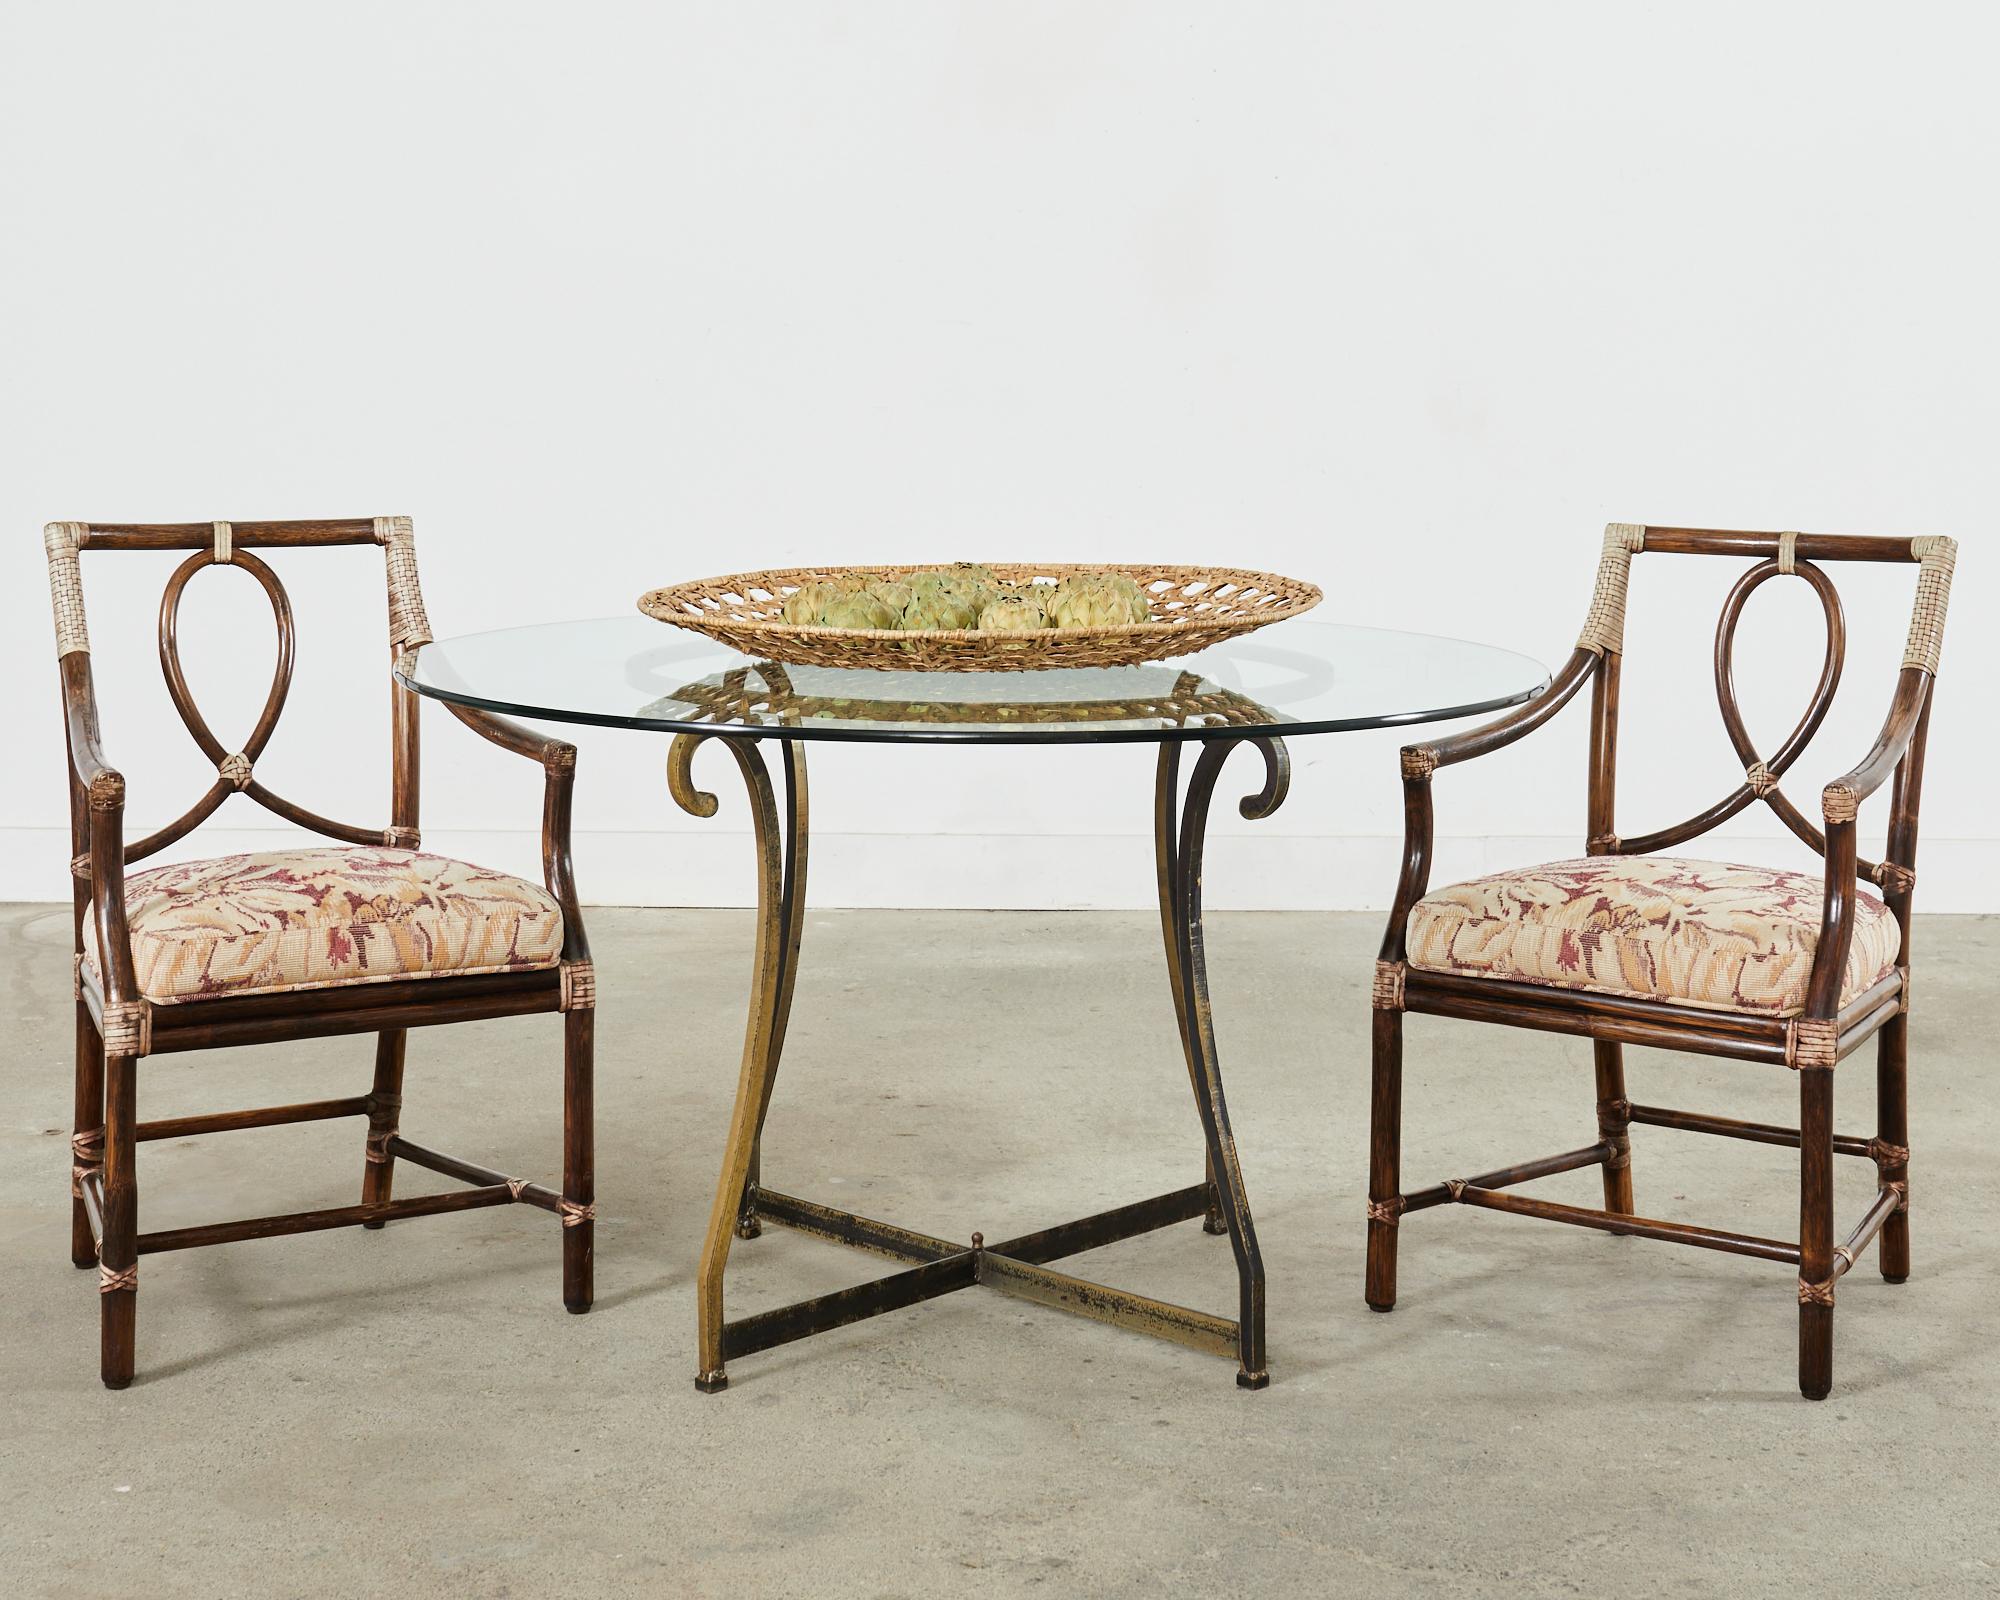 Distinctive set of six McGuire loop-back dining armchairs made in the California coastal organic modern style by McGuire. Designed by Elinor McGuire in the 1970s the Leona loop chair is one of their most iconic and beautiful styles. The rattan